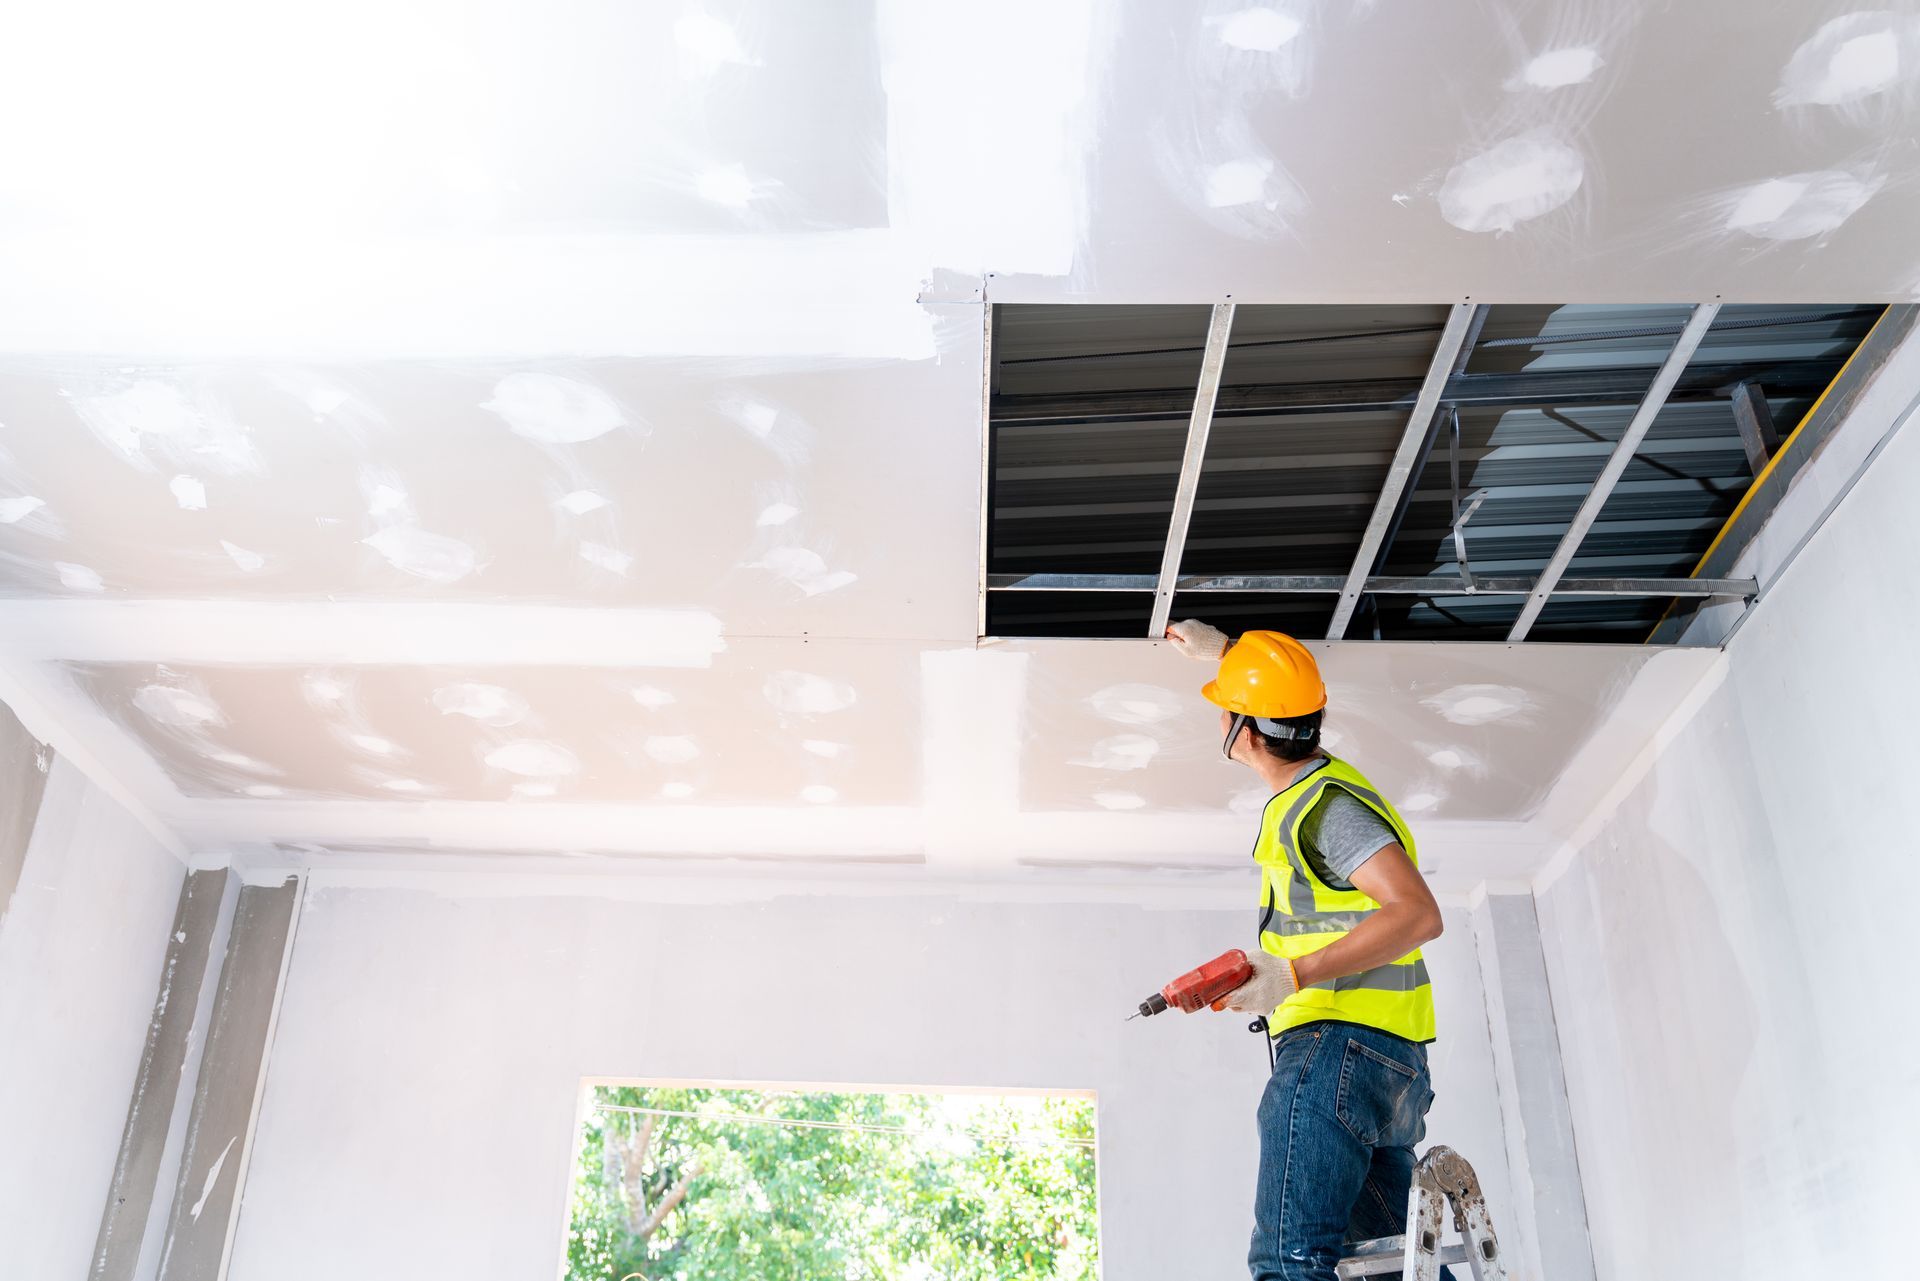 A skilled handyman wearing protective gear is assembling a suspended ceiling using drywall.